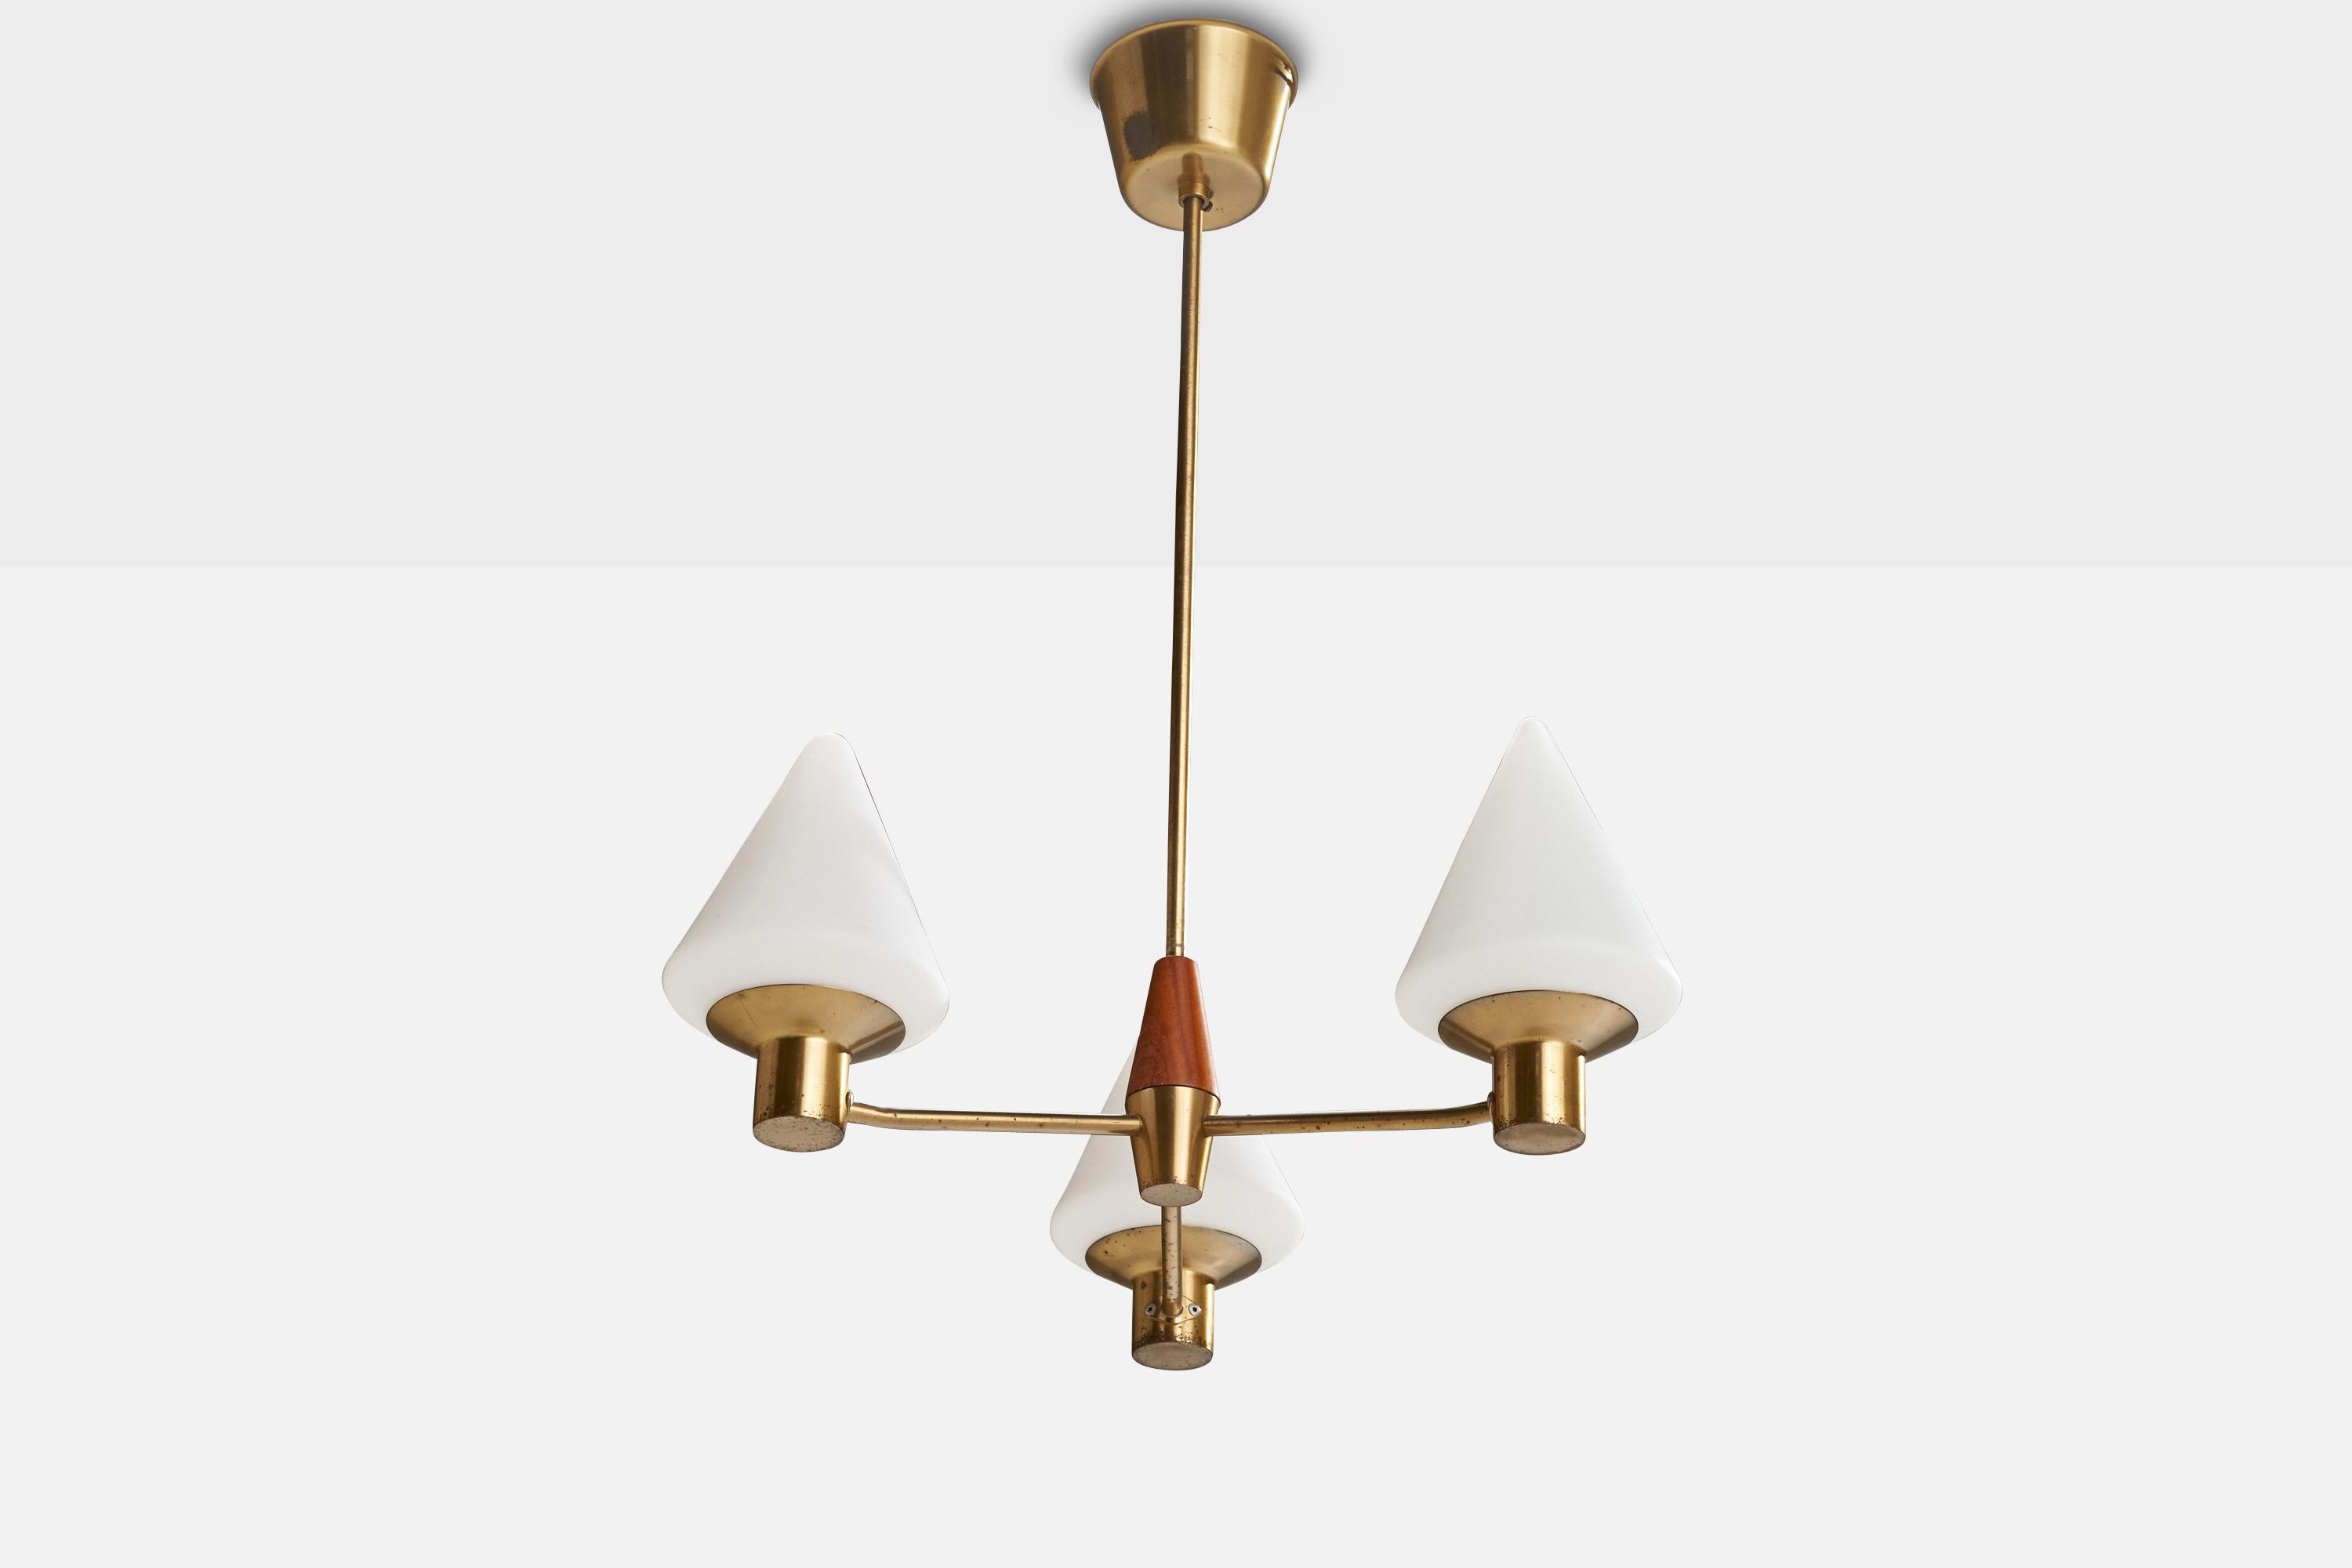 A brass, teak and opaline glass chandelier produced by ASEA, Sweden, 1950s.

Dimensions of canopy (inches): 4.32” H x 3.19” Diameter
Socket takes standard E-26 bulbs. 3 socket.There is no maximum wattage stated on the fixture. All lighting will be